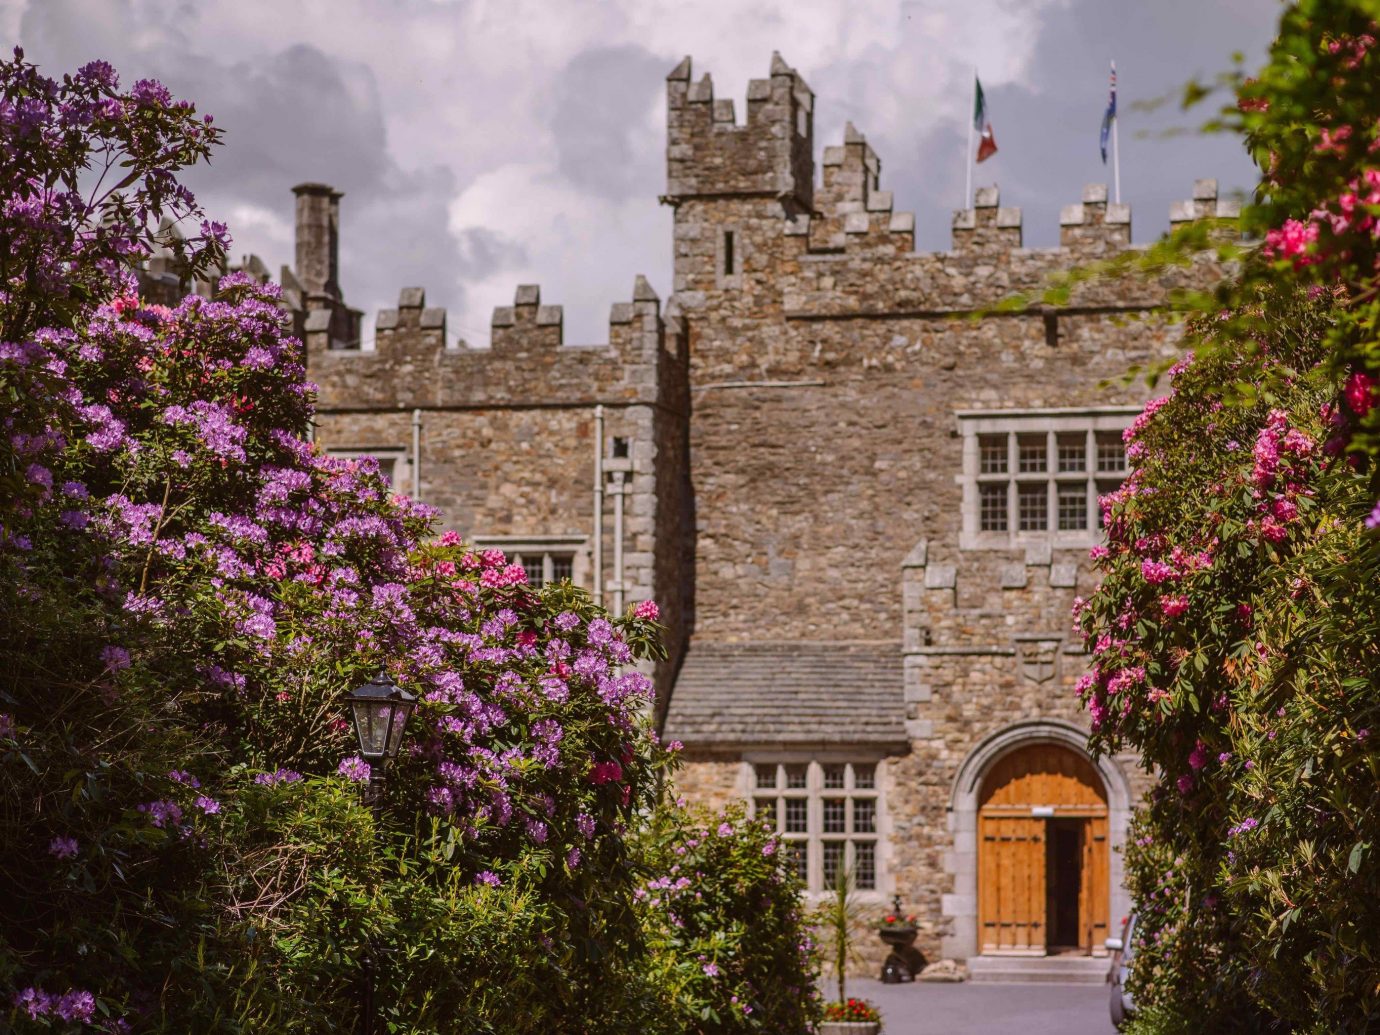 Hotels tree outdoor building sky flower City estate tourism château Garden old palace castle Courtyard stone surrounded crowd castle hotel Ireland